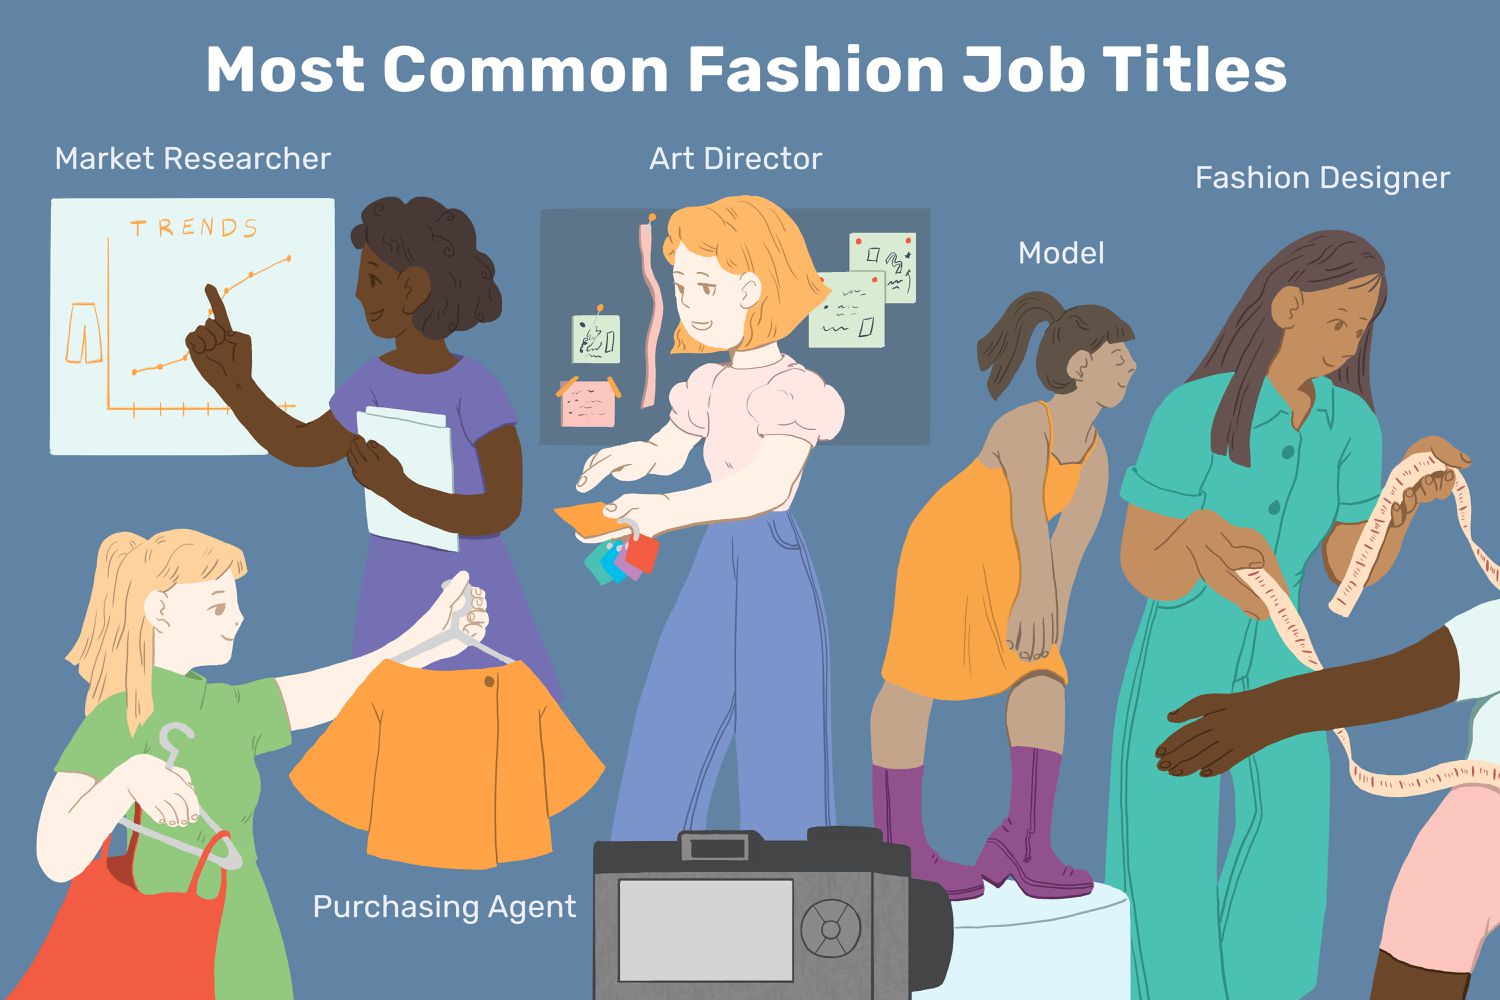 How Can I Find Fashion Jobs?